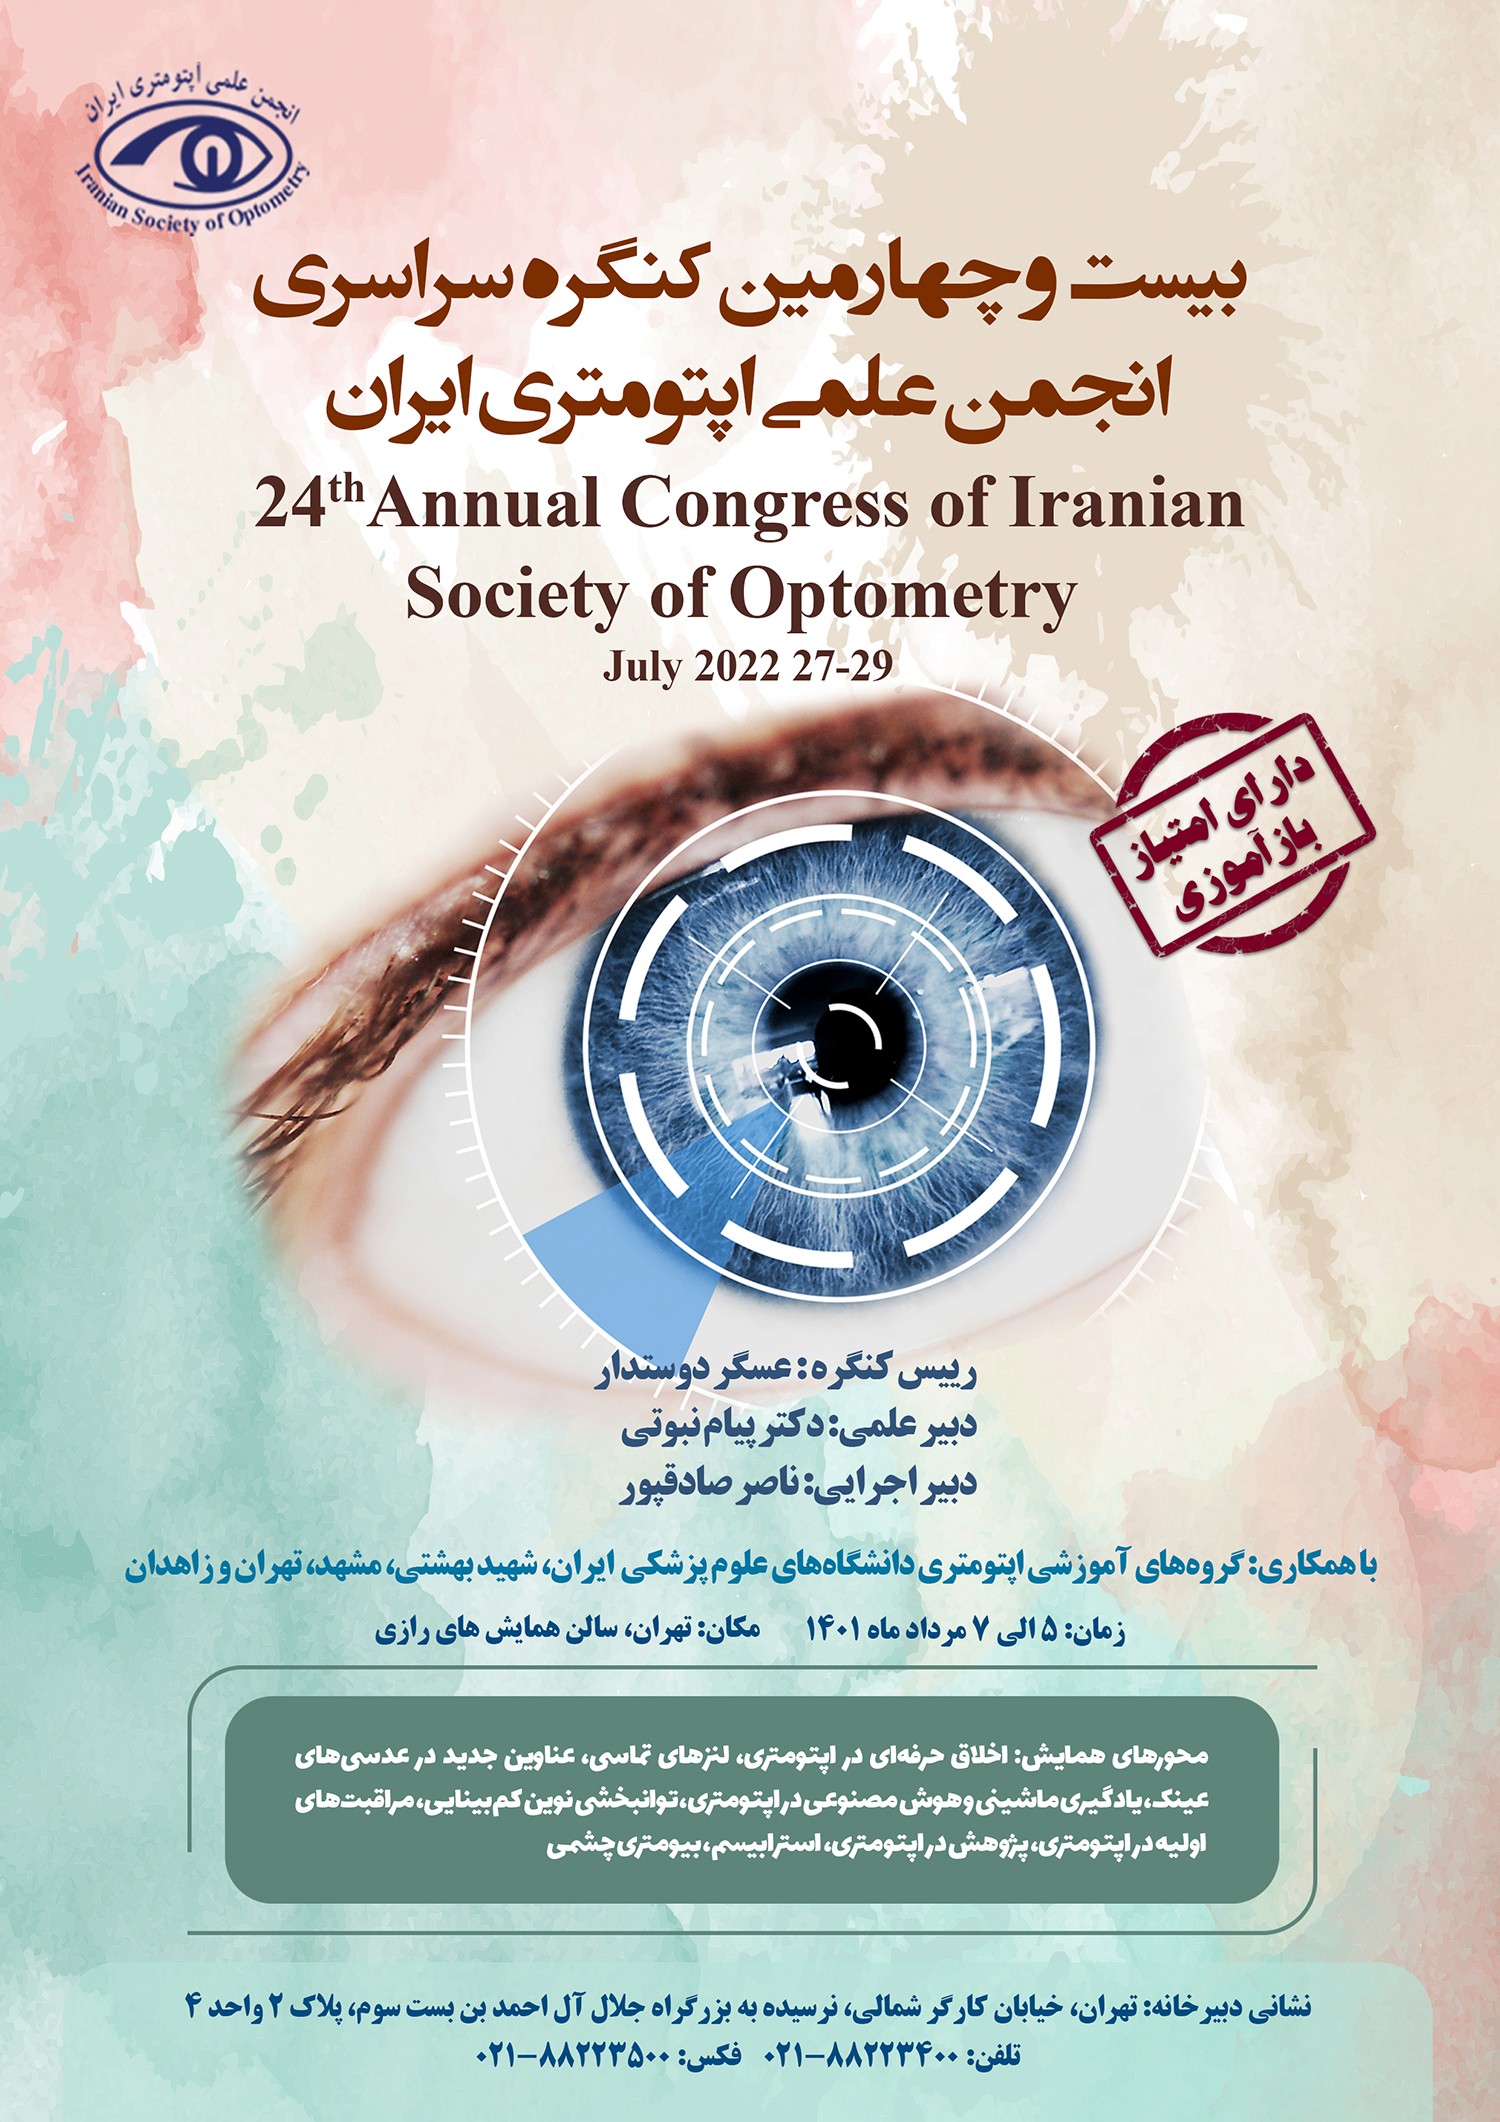 24th Annual Congress of Iranian Society of Optometry